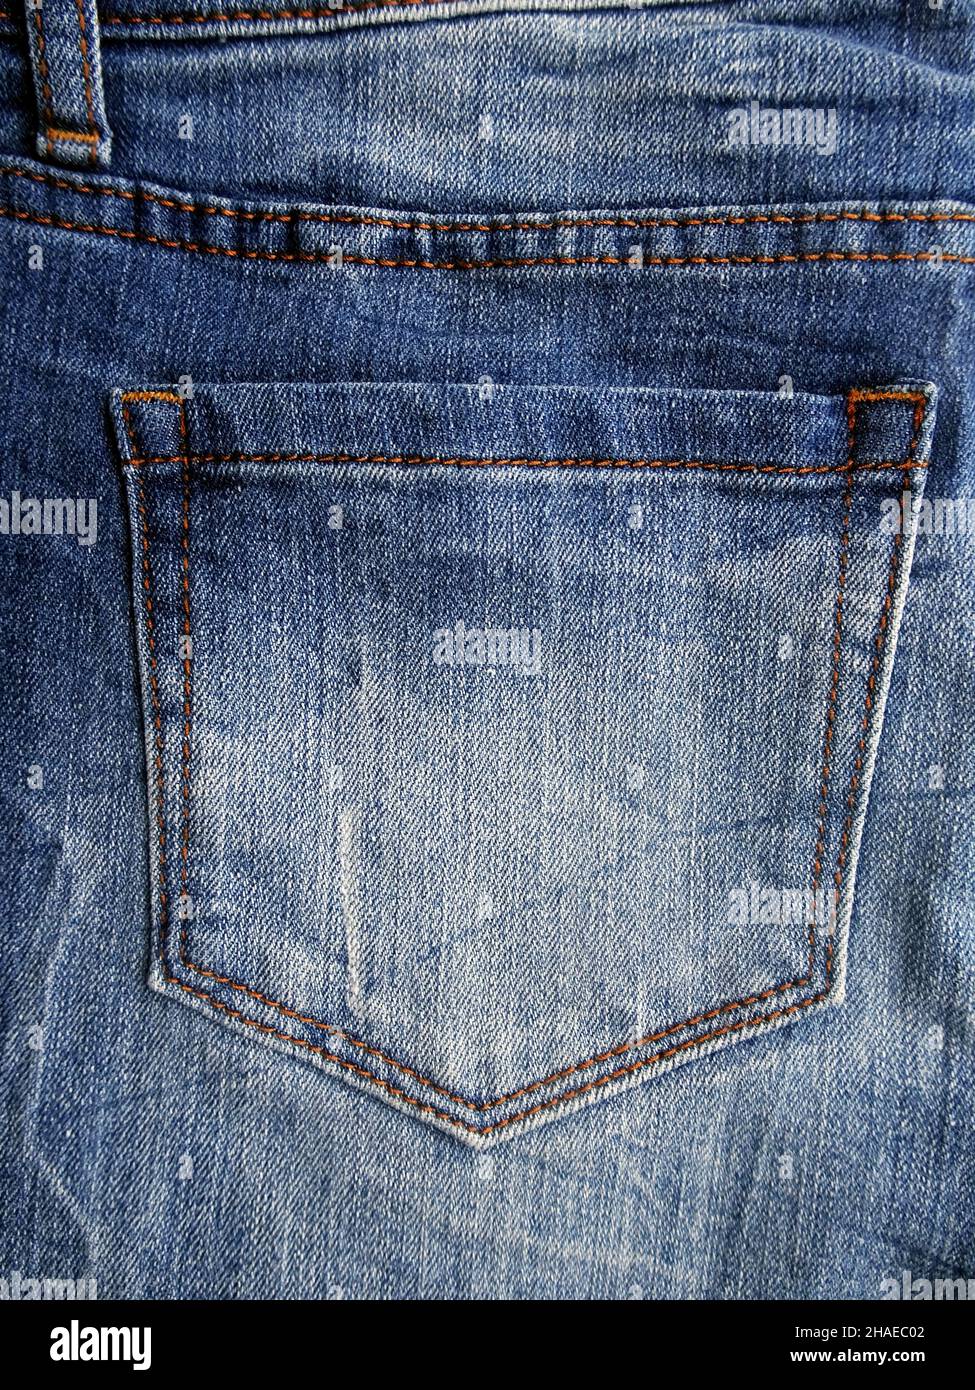 Background of worn jeans pocket Stock Photo